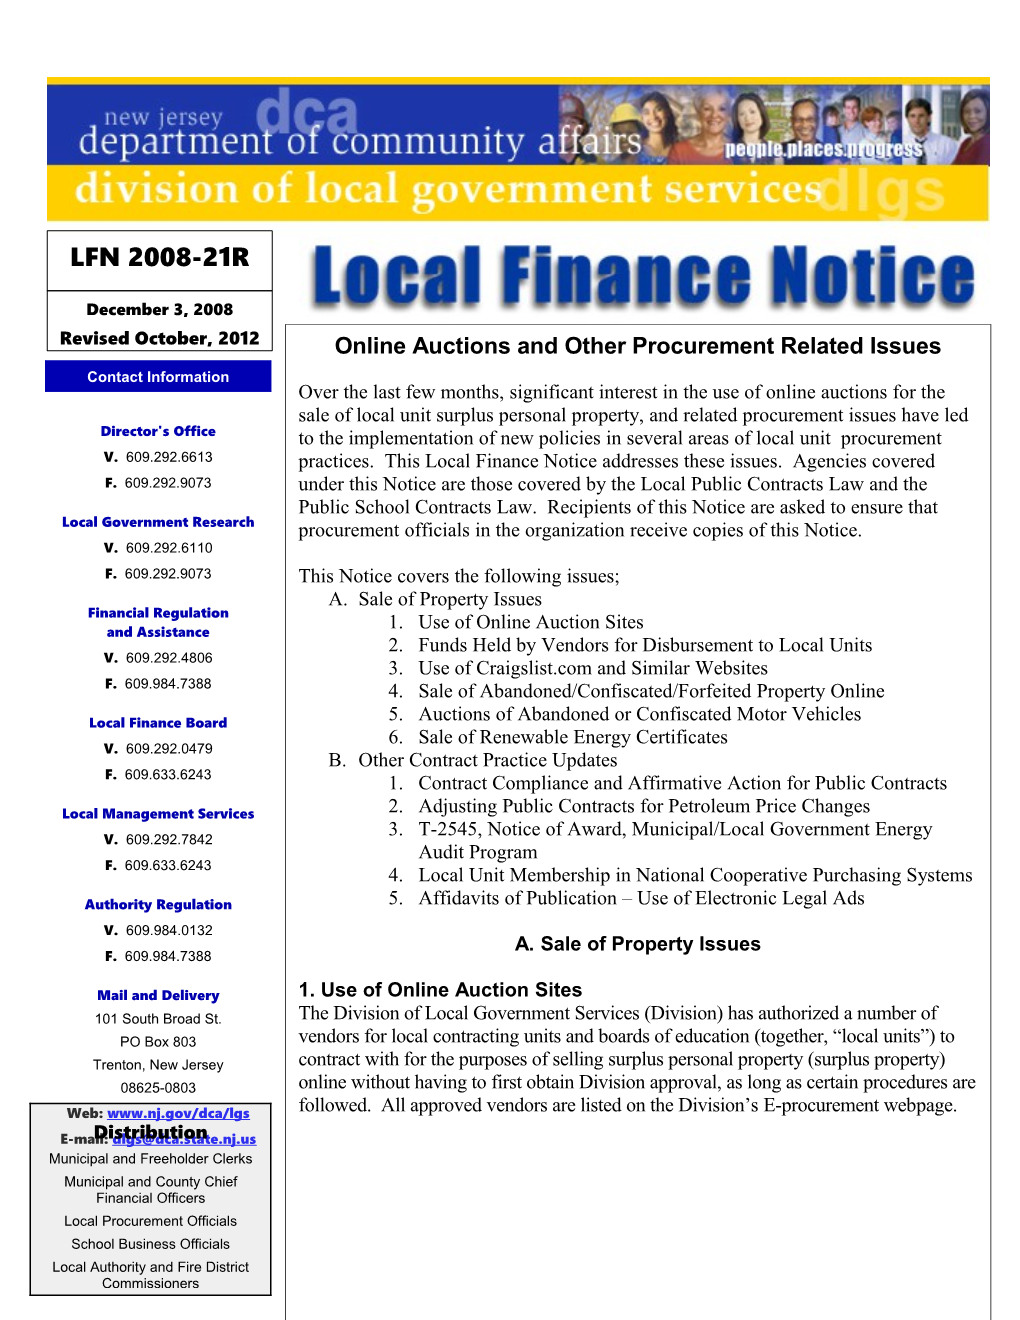 Local Finance Notice 2008-21December 3, 2008Page 1